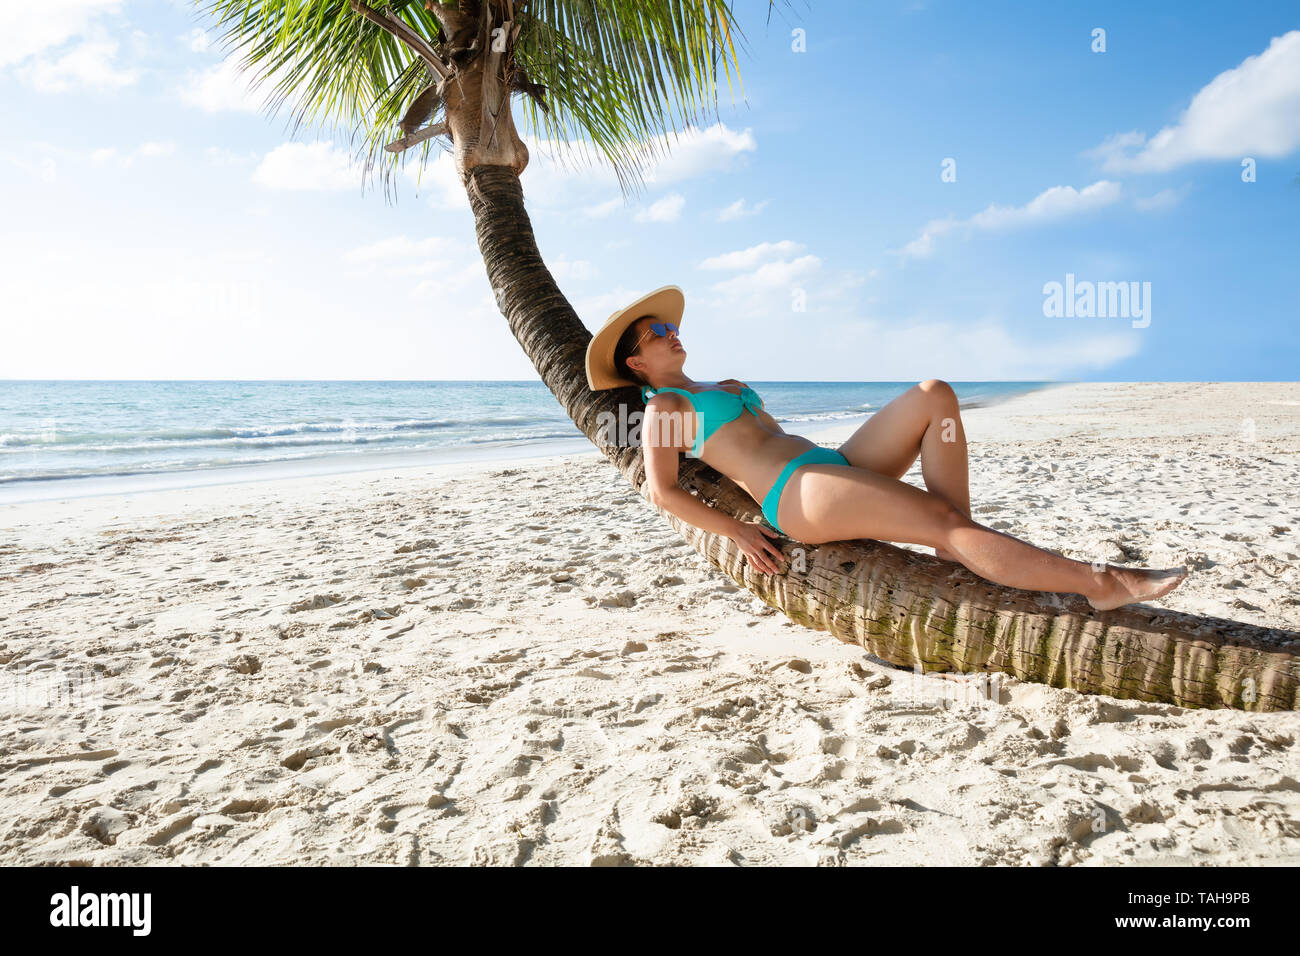 Young Woman In Bikini Relaxing On Crooked Palm Tree At Sandy Beach Stock Photo